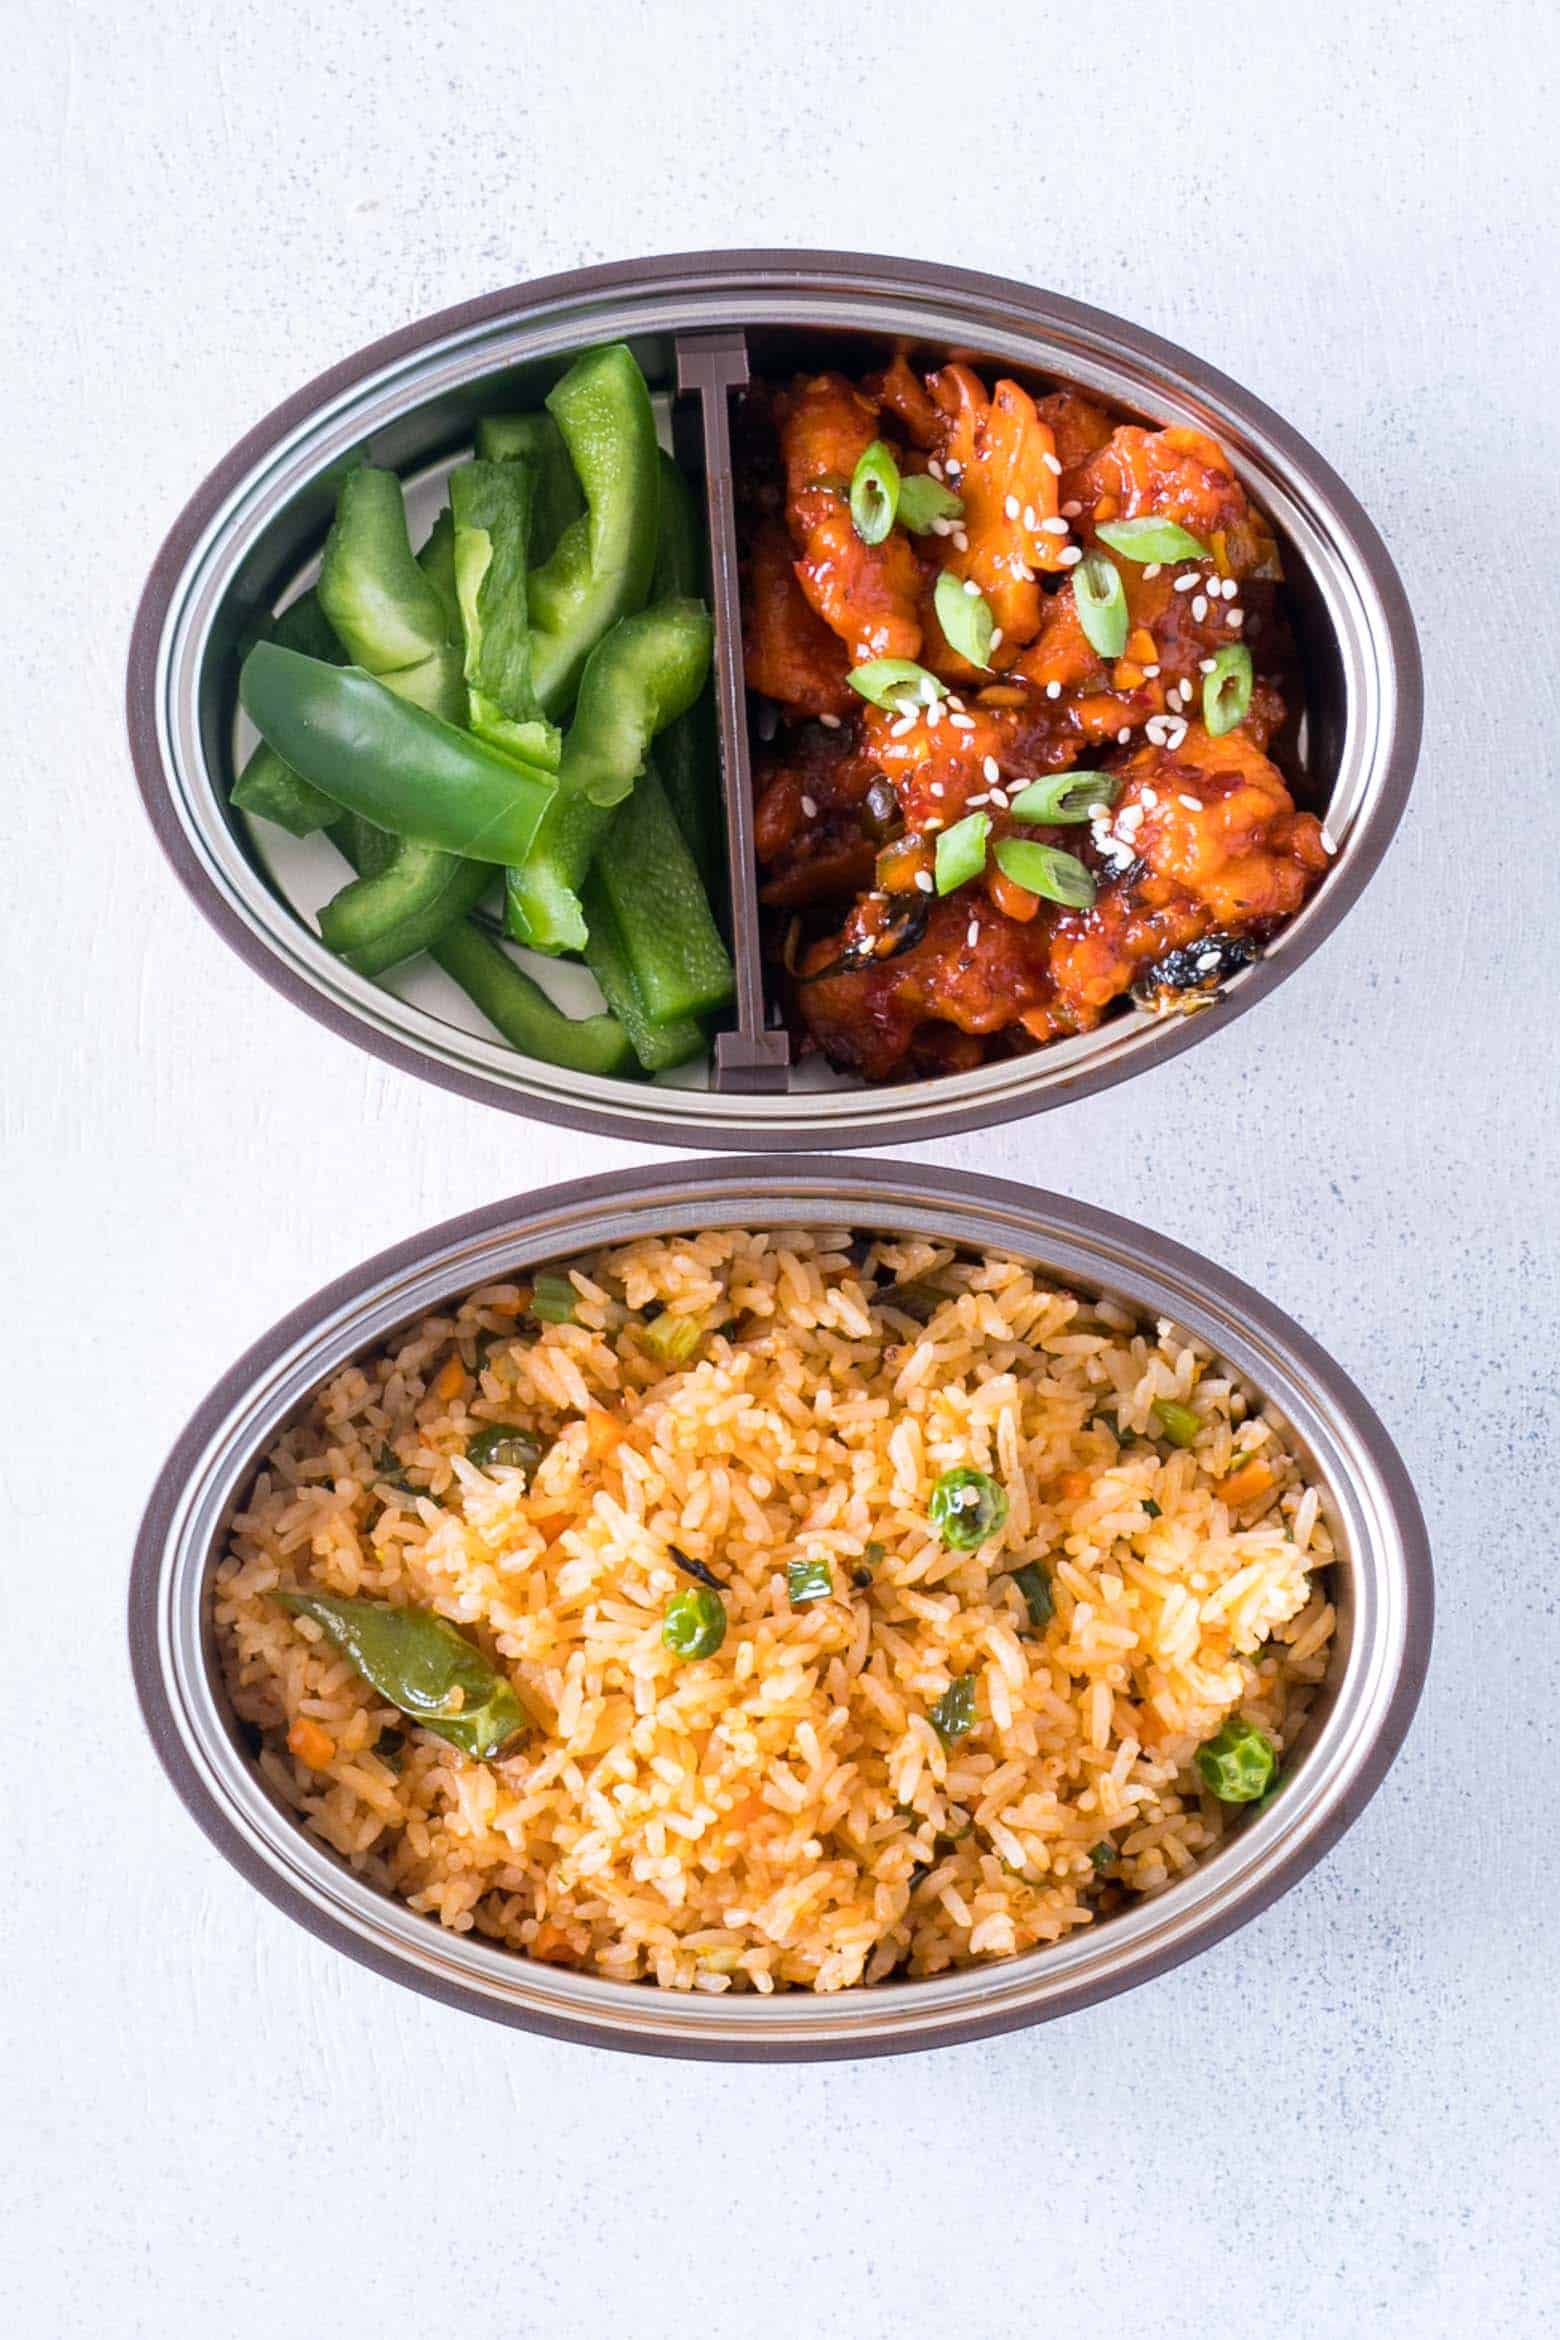 Looking for lunch box ideas for adults that also happen to be healthy and hearty? Take a look at some fun lunch box meals for adults that will keep you full till dinner!